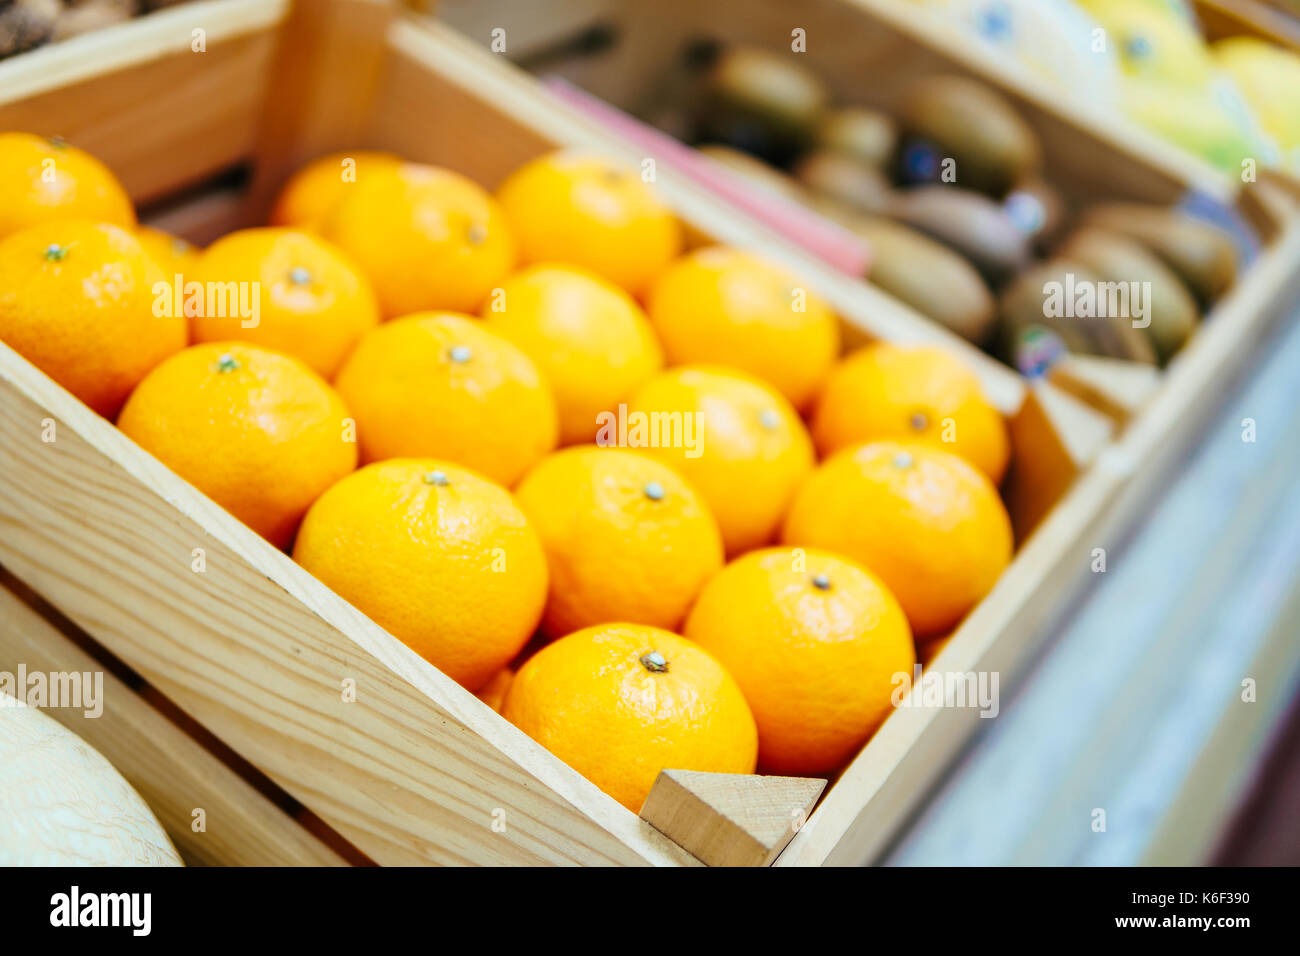 Oranges For Sale In Fruit Market Stock Photo